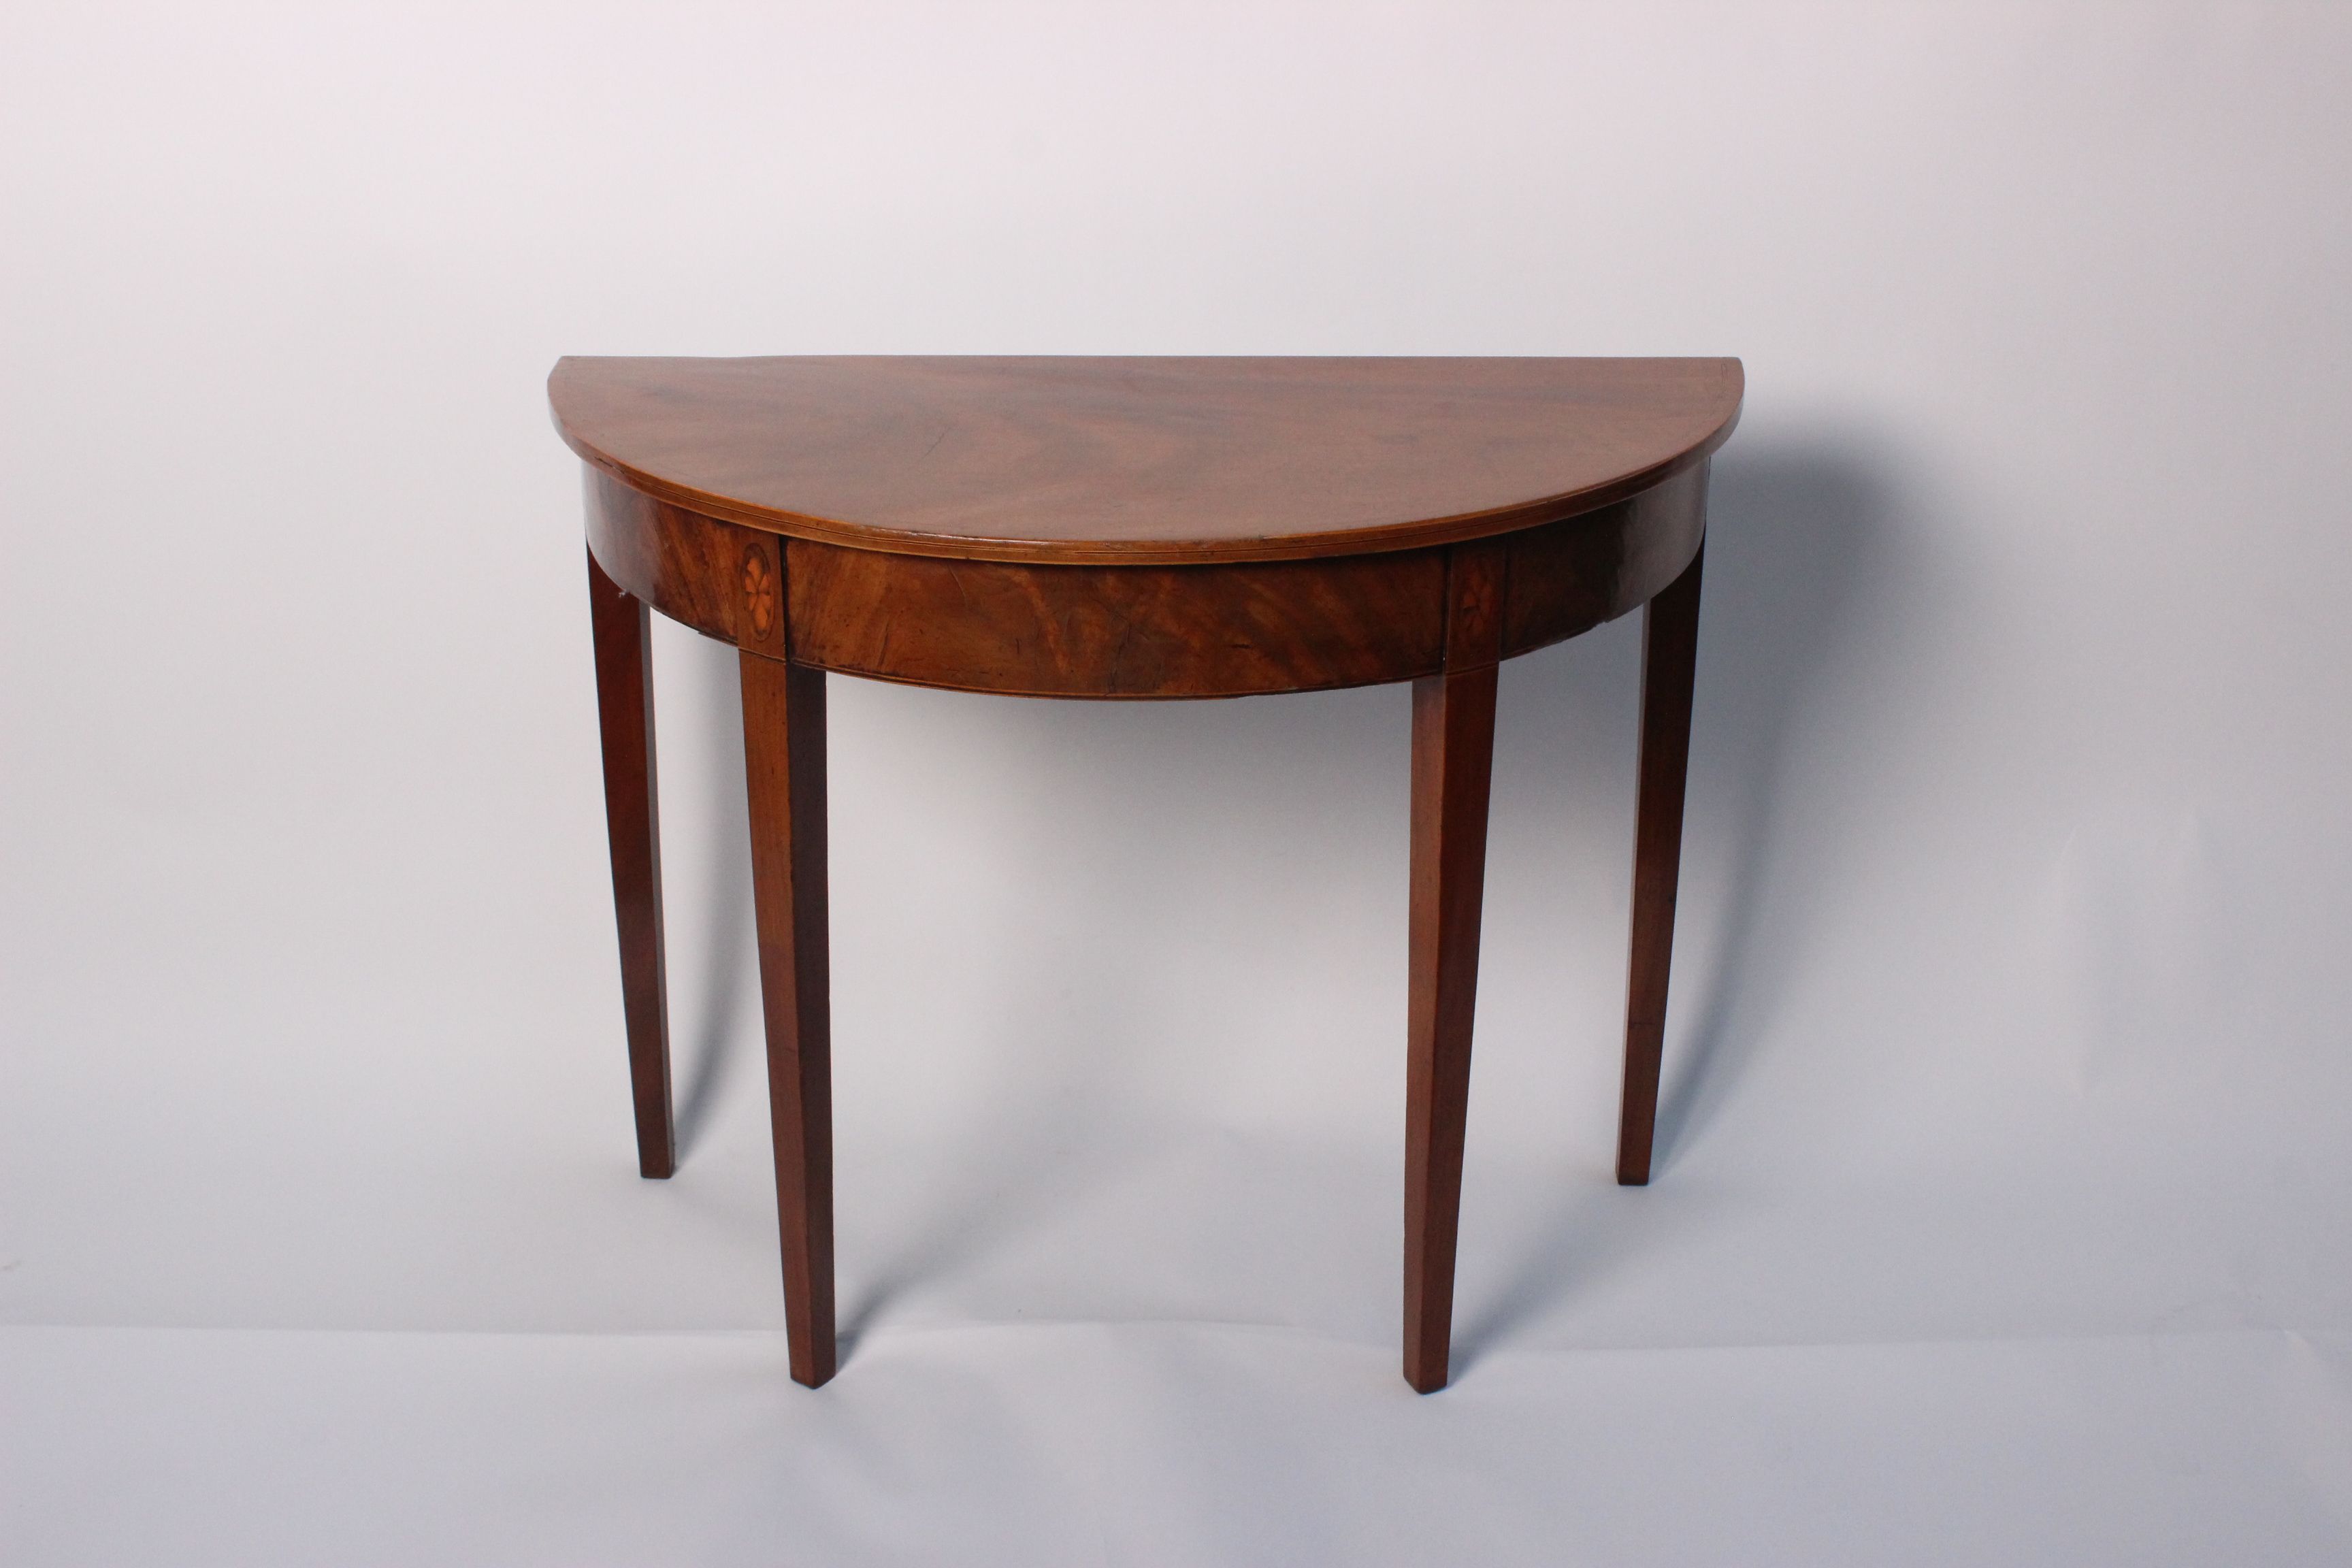 A 19th Century mahogany and inlaid D-shaped side table 71cm high, 91cm wide, 45cm deep